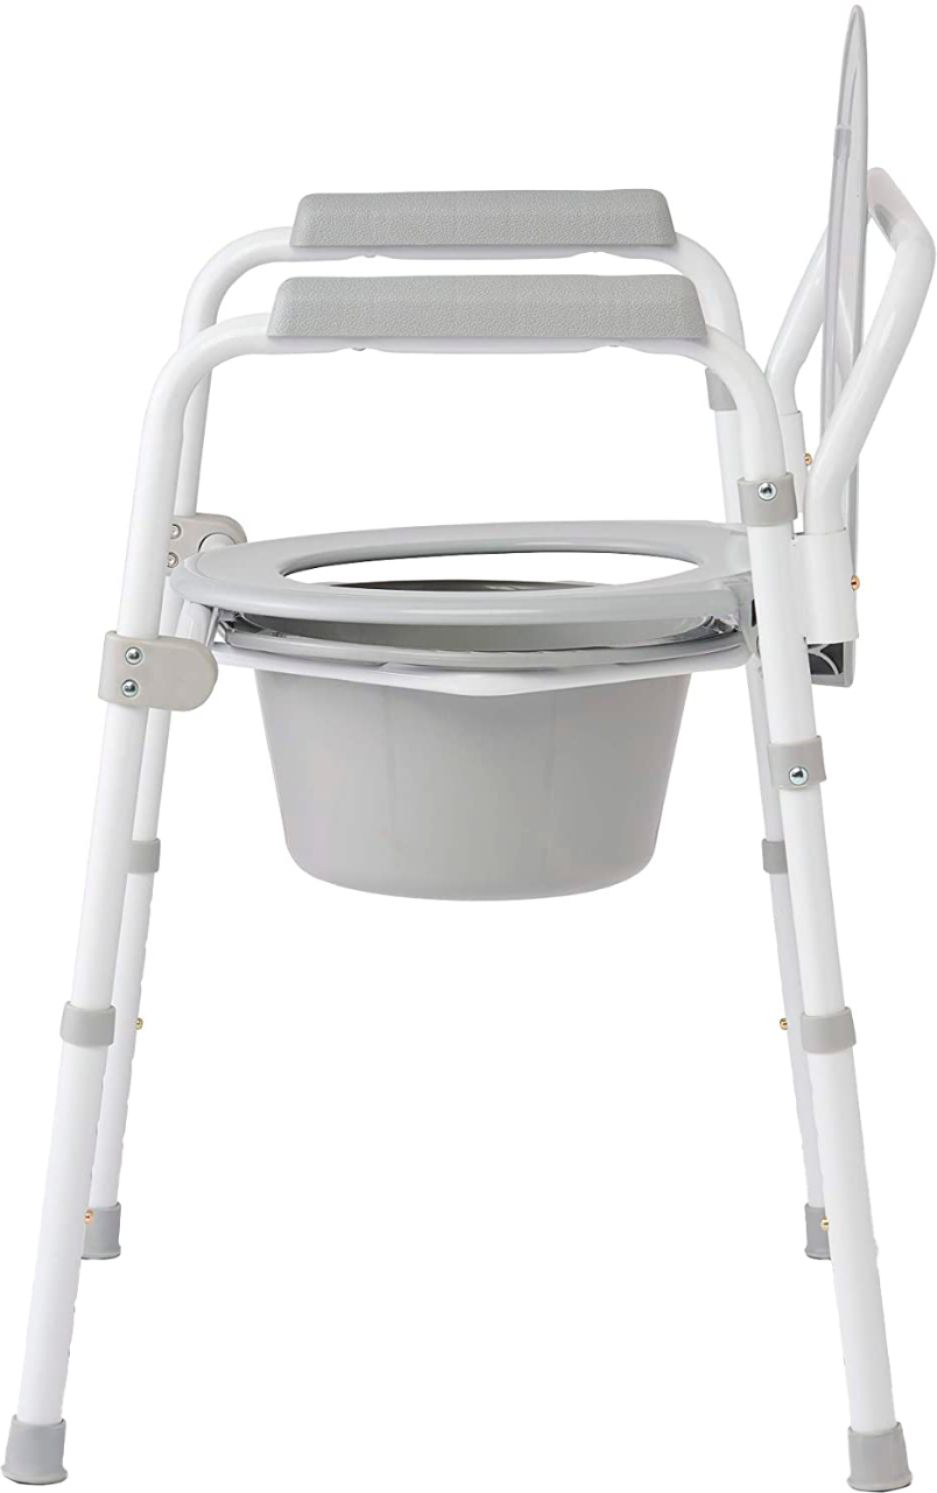 Angle View: Medline 3-in-1 Steel Folding Bedside Commode, Removable Bucket & Seat, 16-22" Height Adjustable